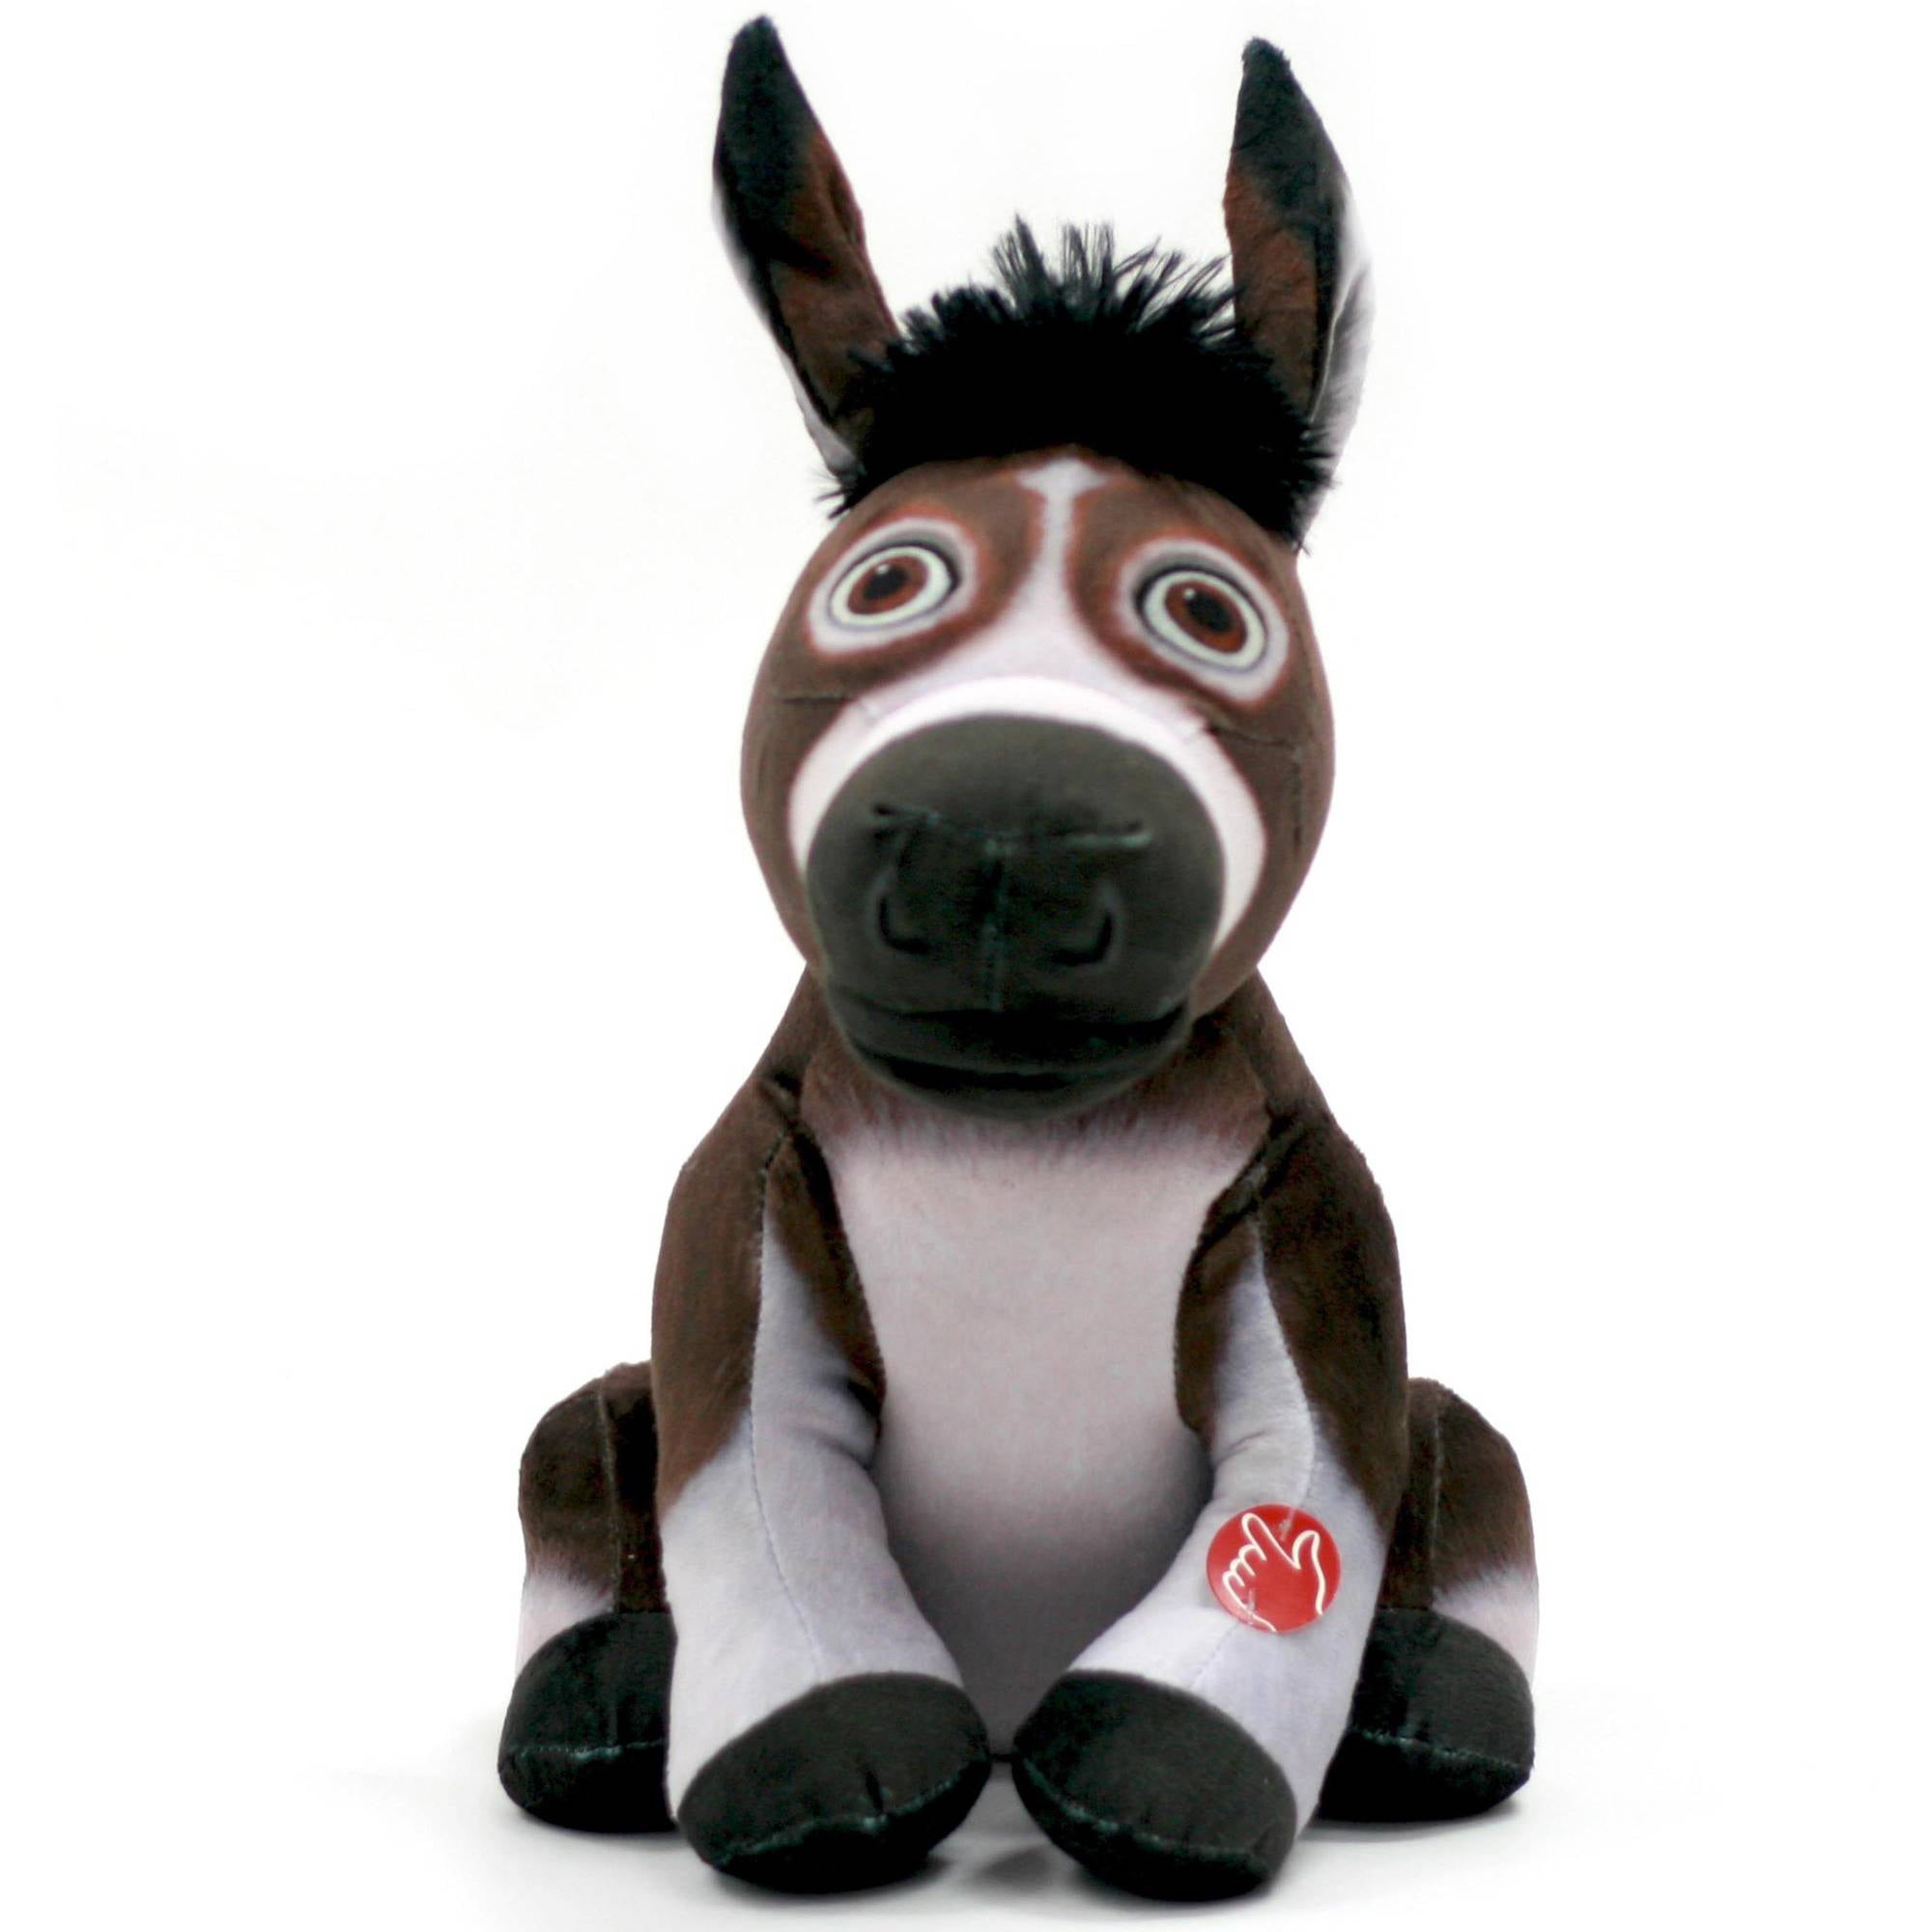 The Star Movie Toys, 10-inch Bo the Donkey Animated and Singing Plush Toy -  